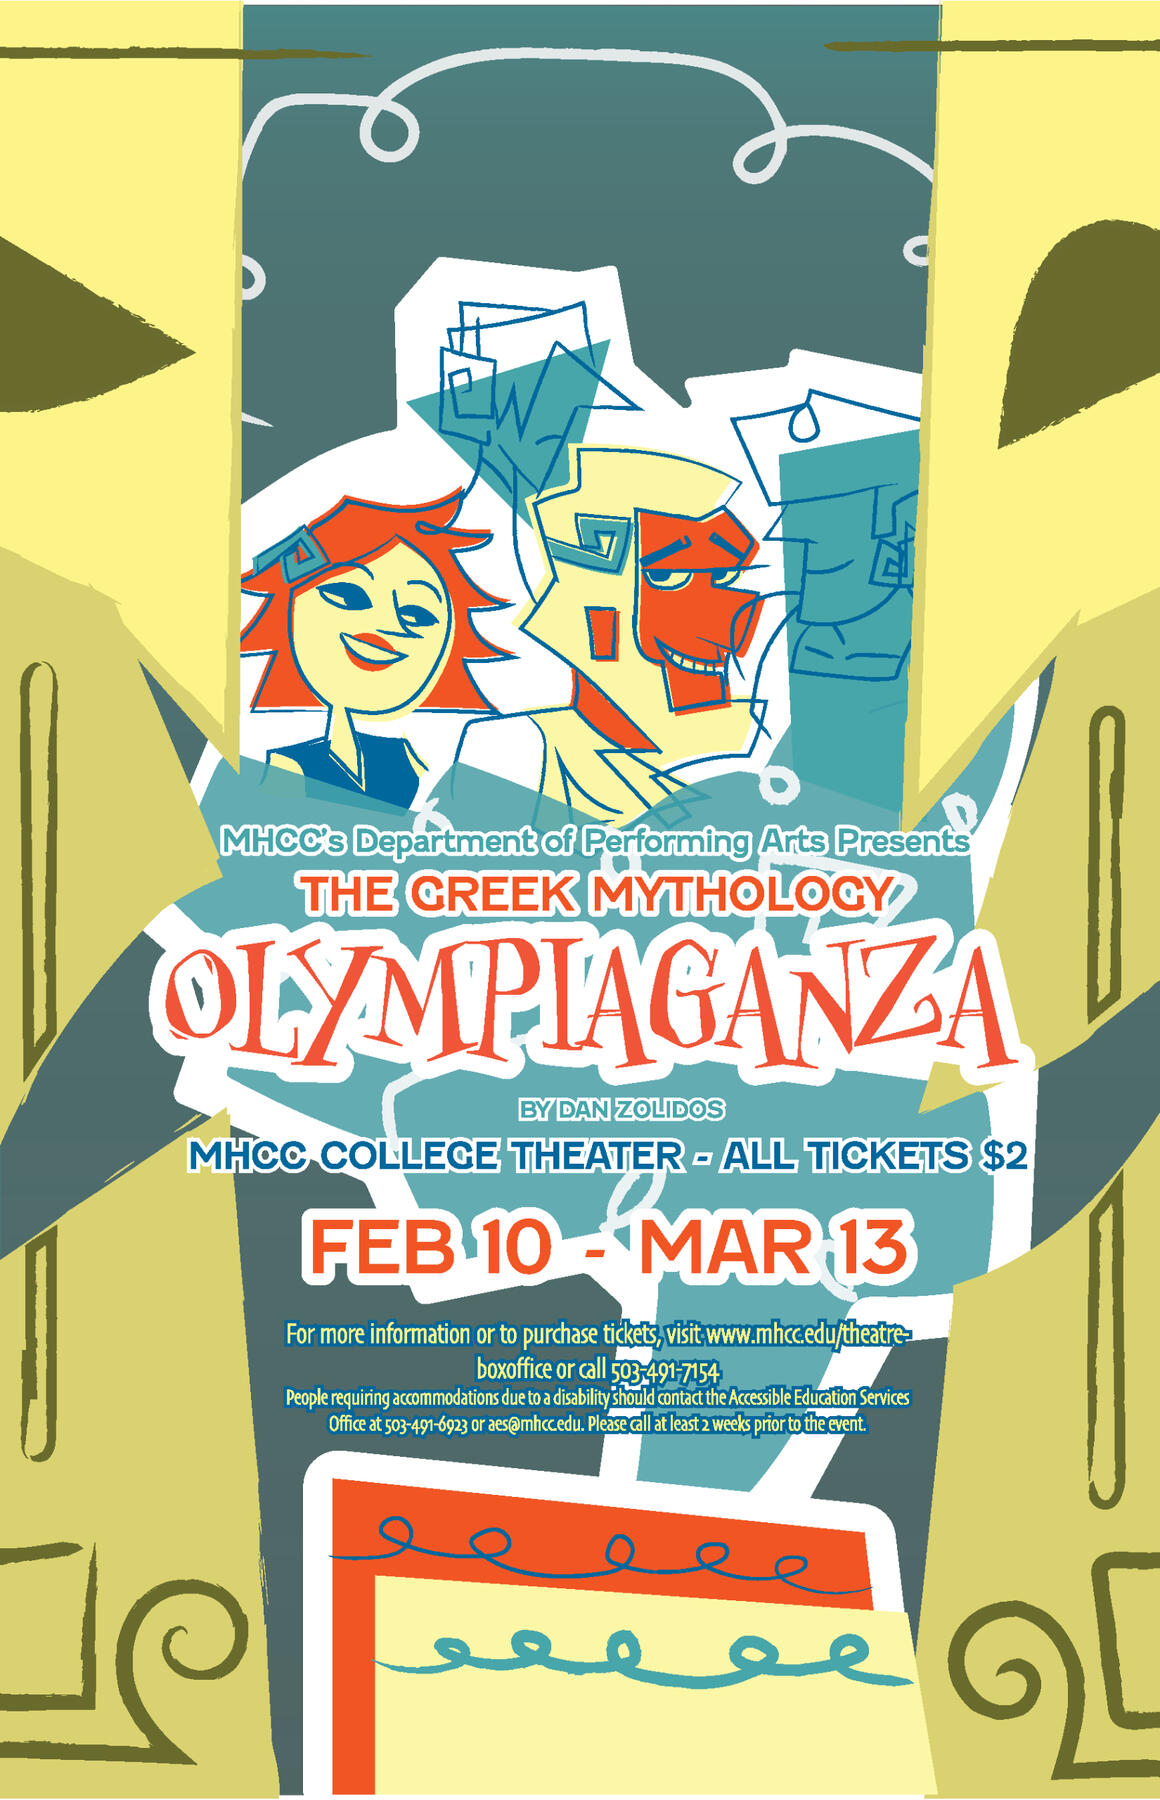 The poster done for the Olympiaganza play, depicting cartoon caricatures of its characters.